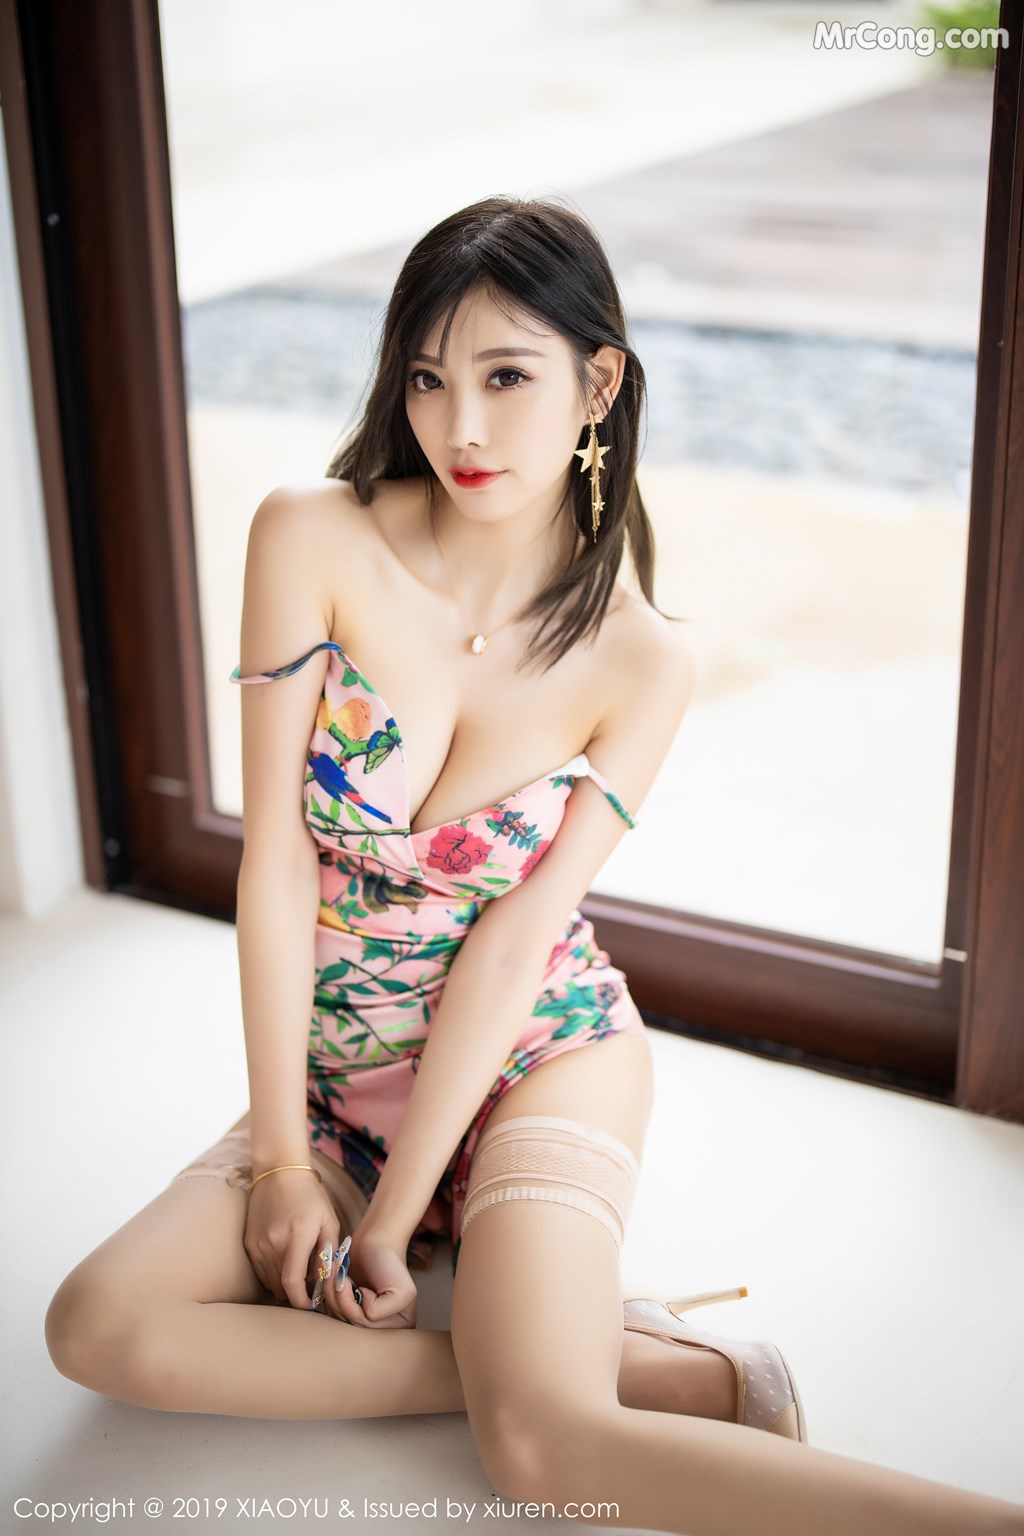 XiaoYu Vol.194: Yang Chen Chen (杨晨晨 sugar) (71 pictures)